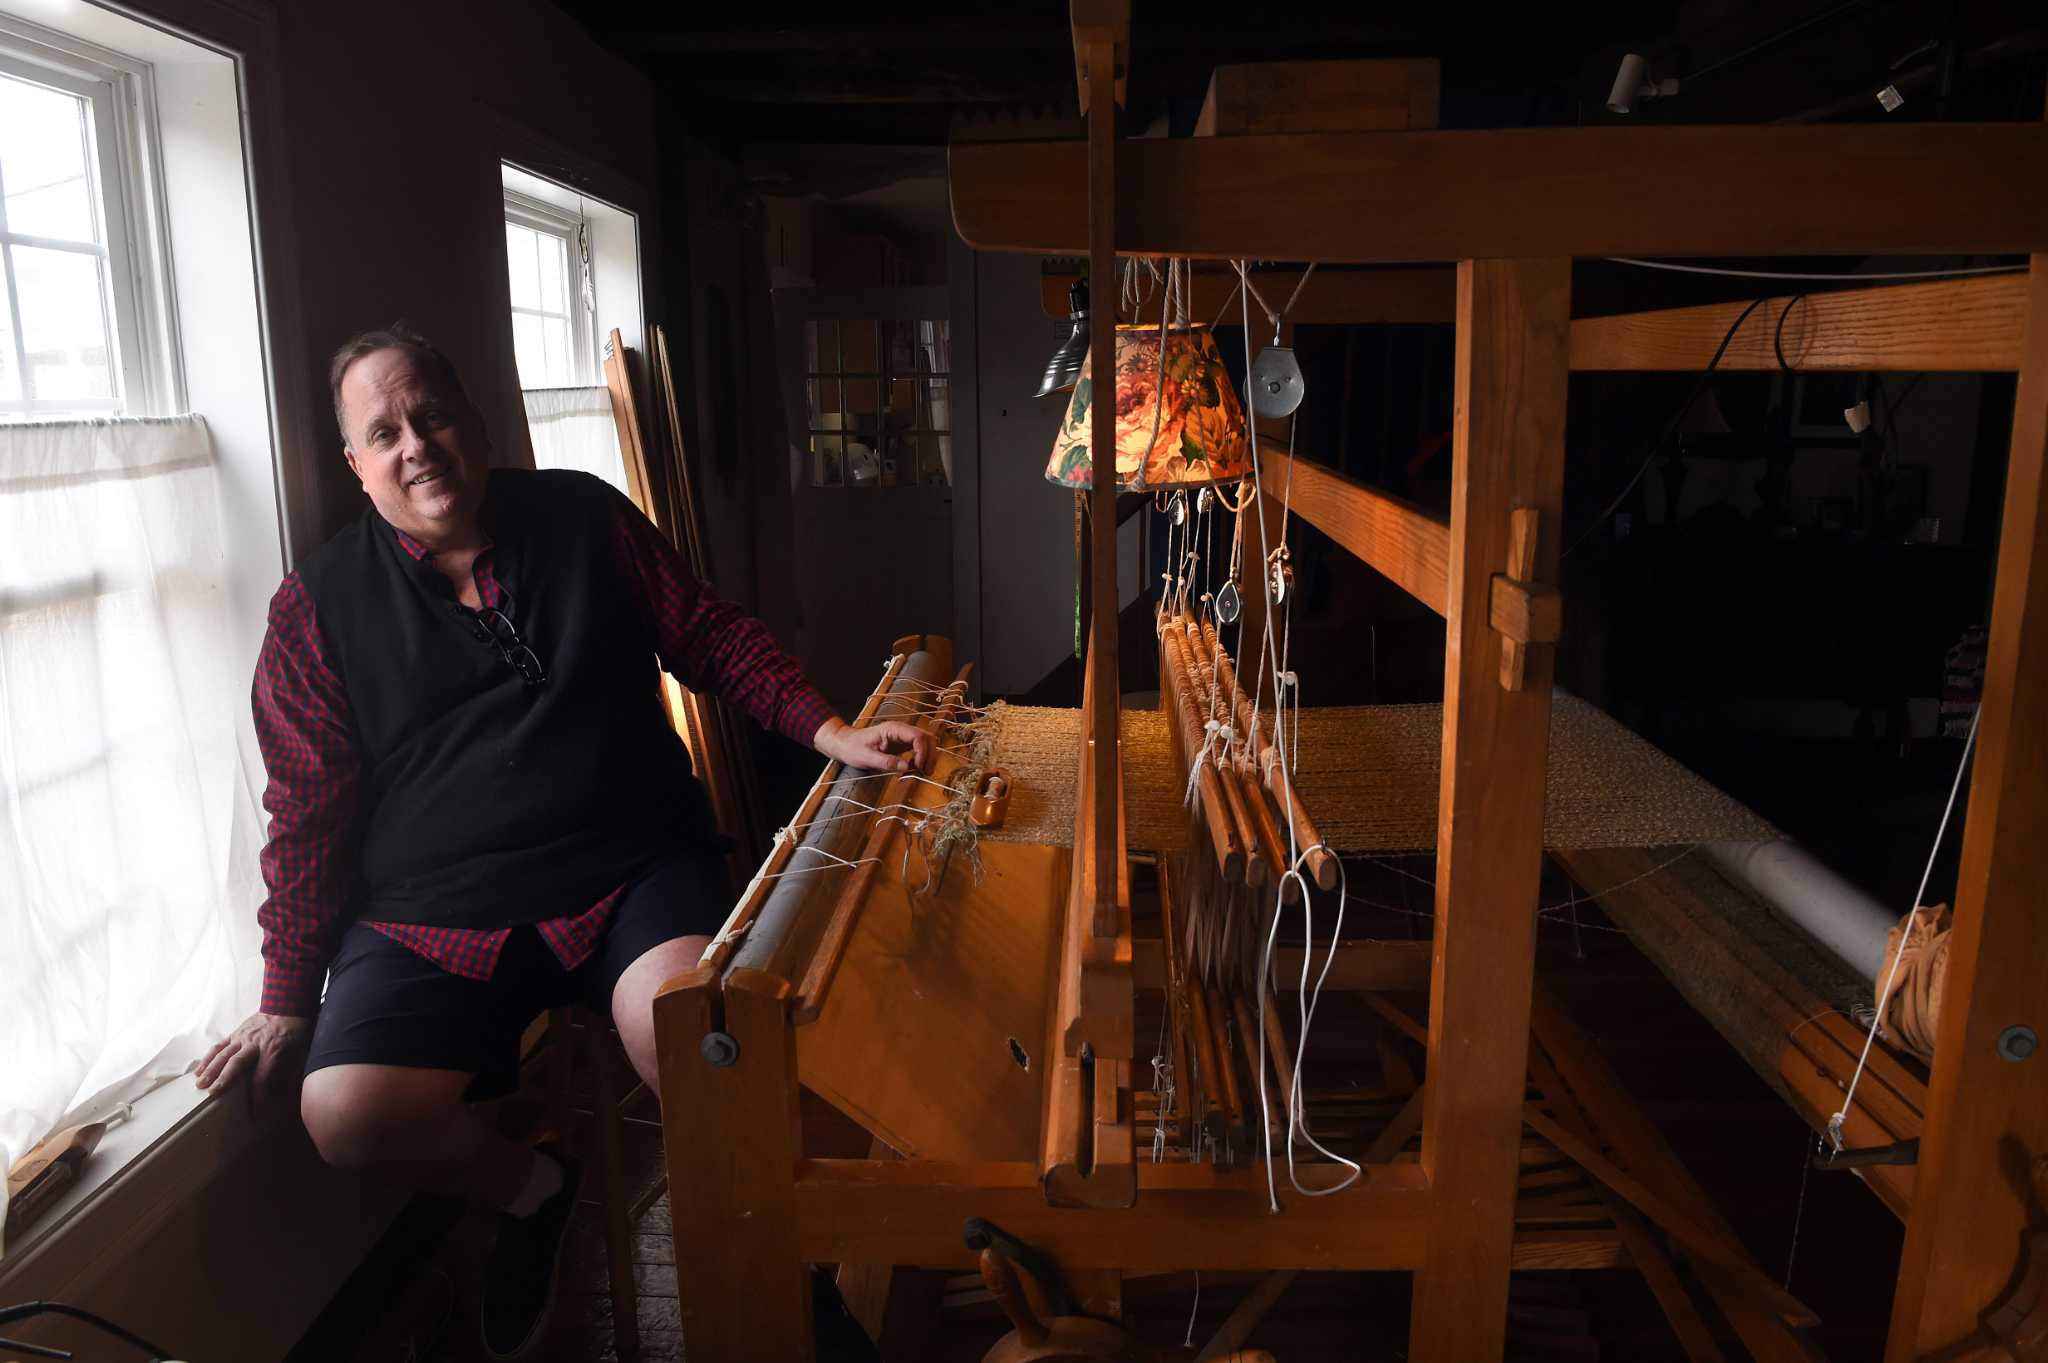 This Branford artist once worked in a high-tech industry. Now he uses a loom designed 400 years ago